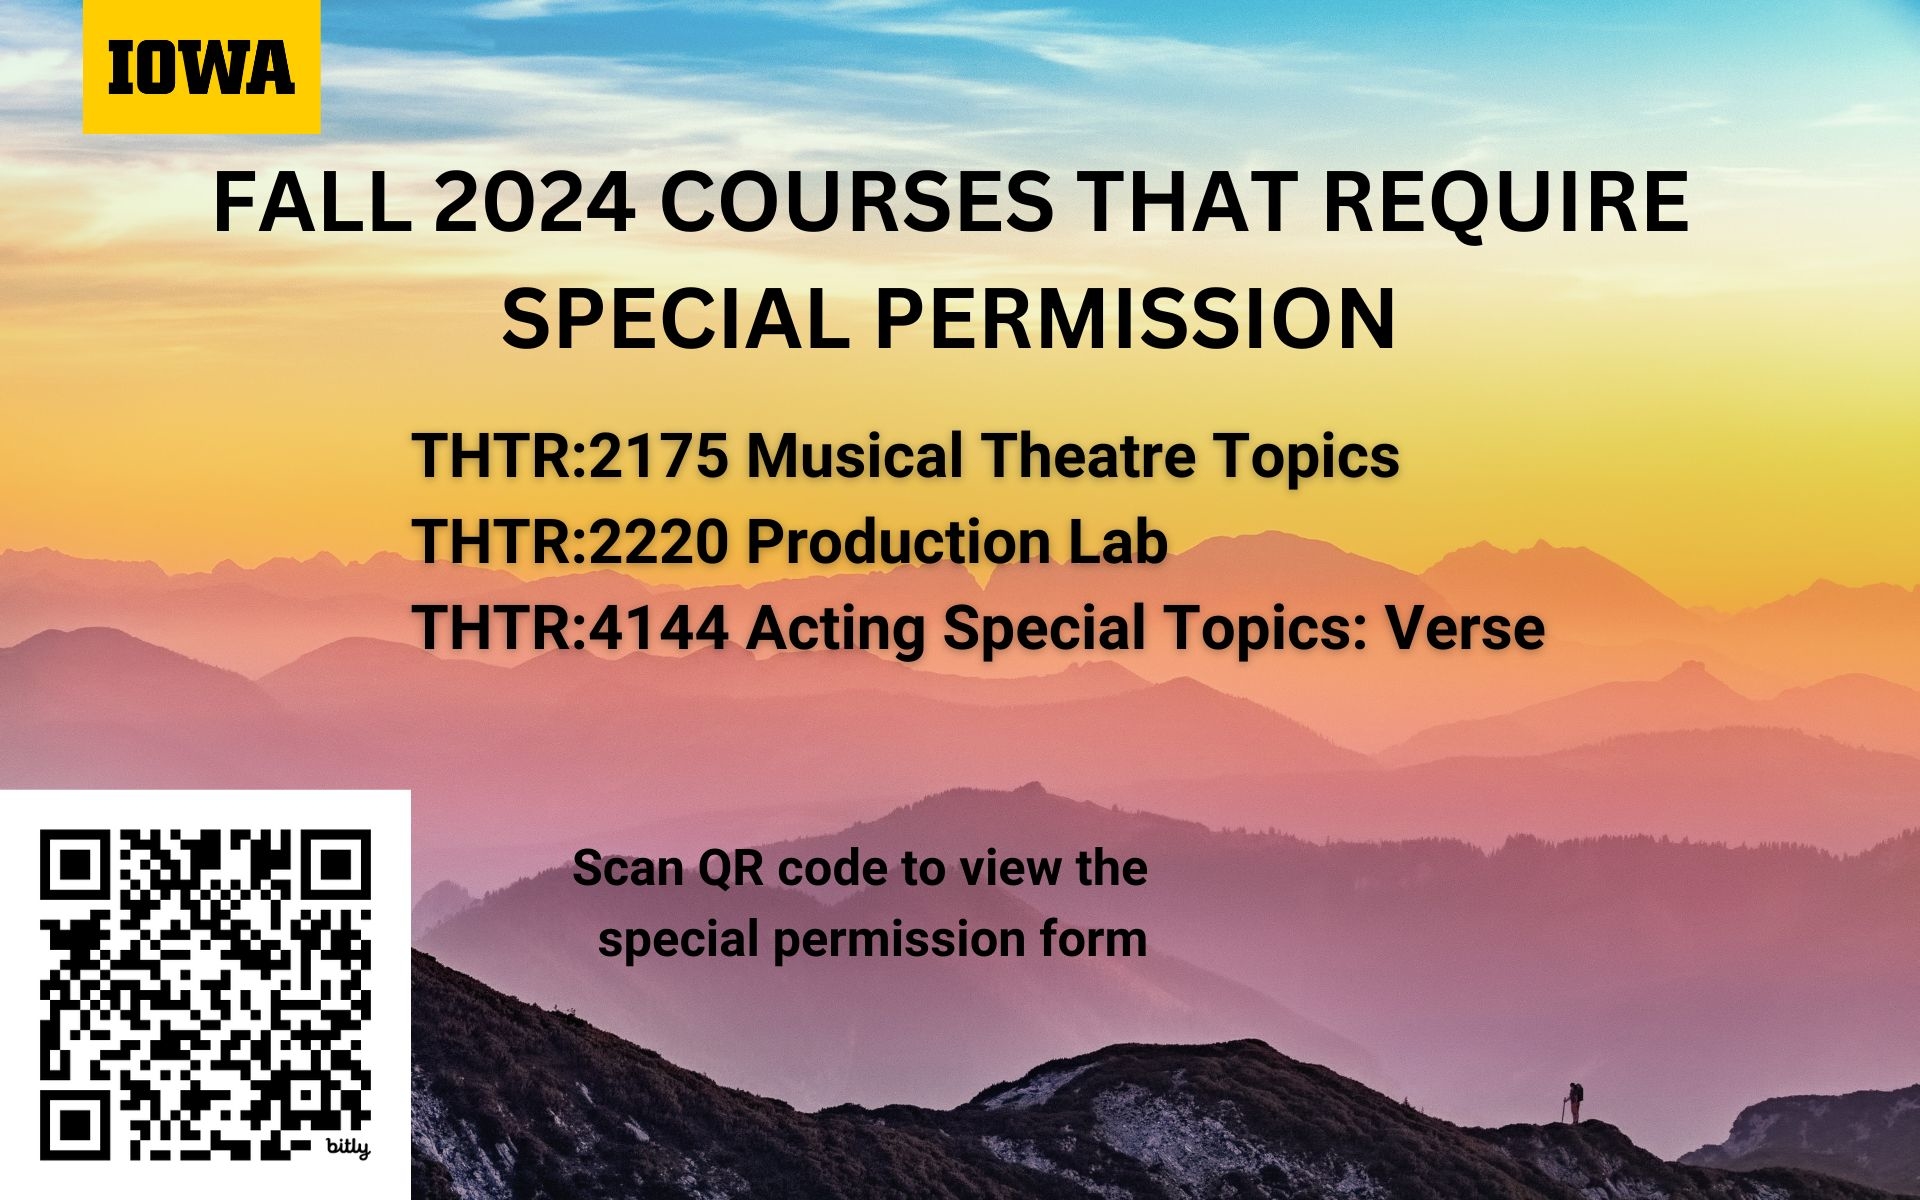 Fall 2024 Courses That require special permission